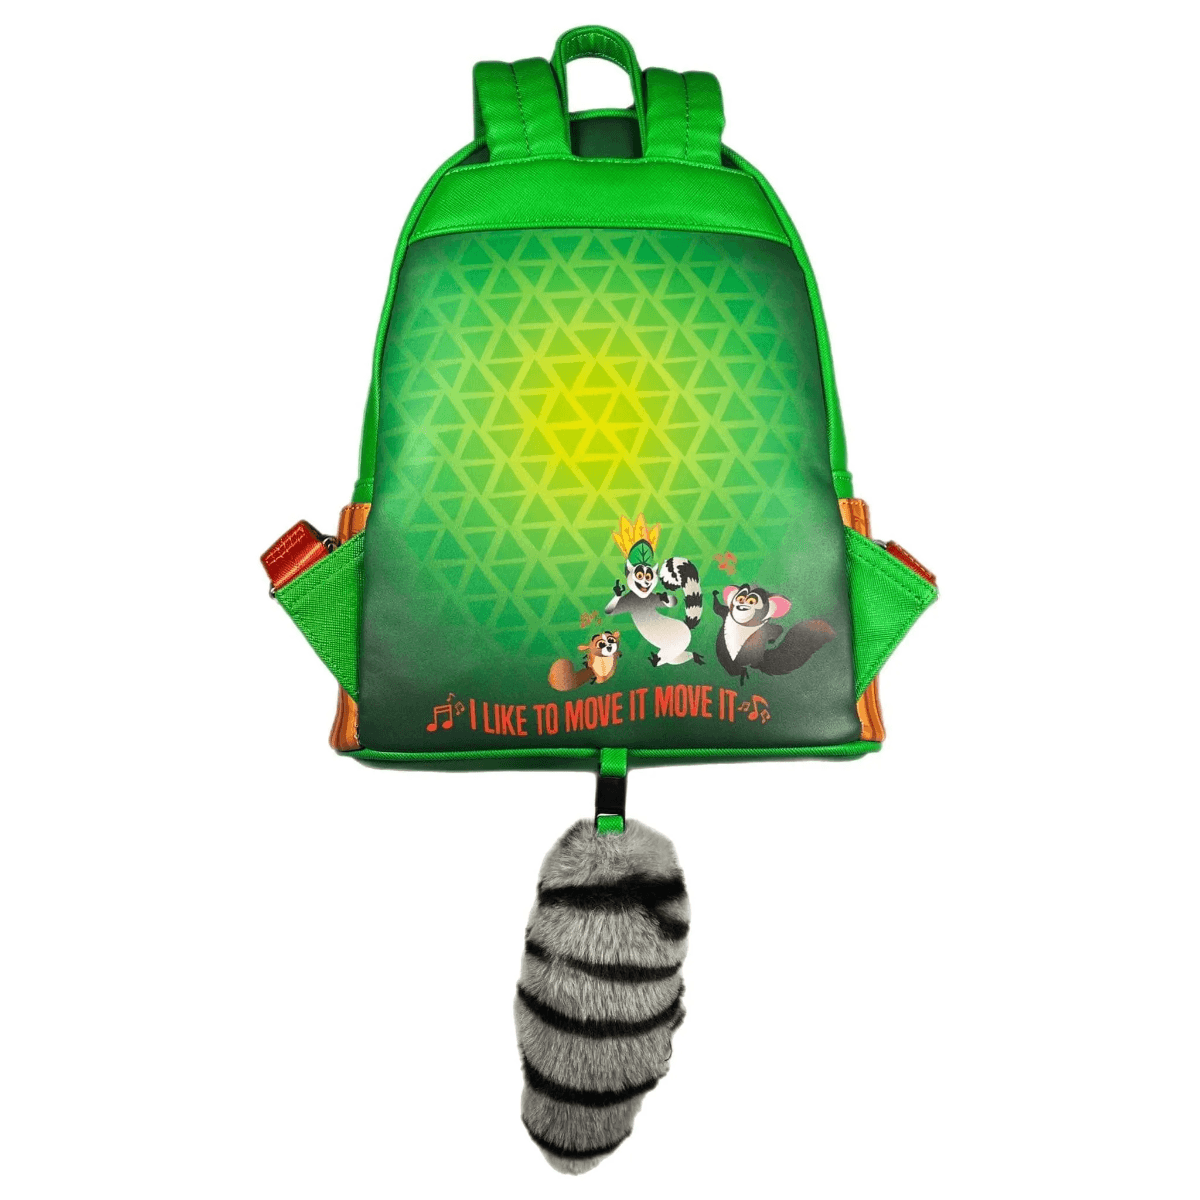 LOUDWBK0007 Madagasca - King Julien Cosplay US Exclusive Mini Backpack [RS] - Loungefly - Titan Pop Culture